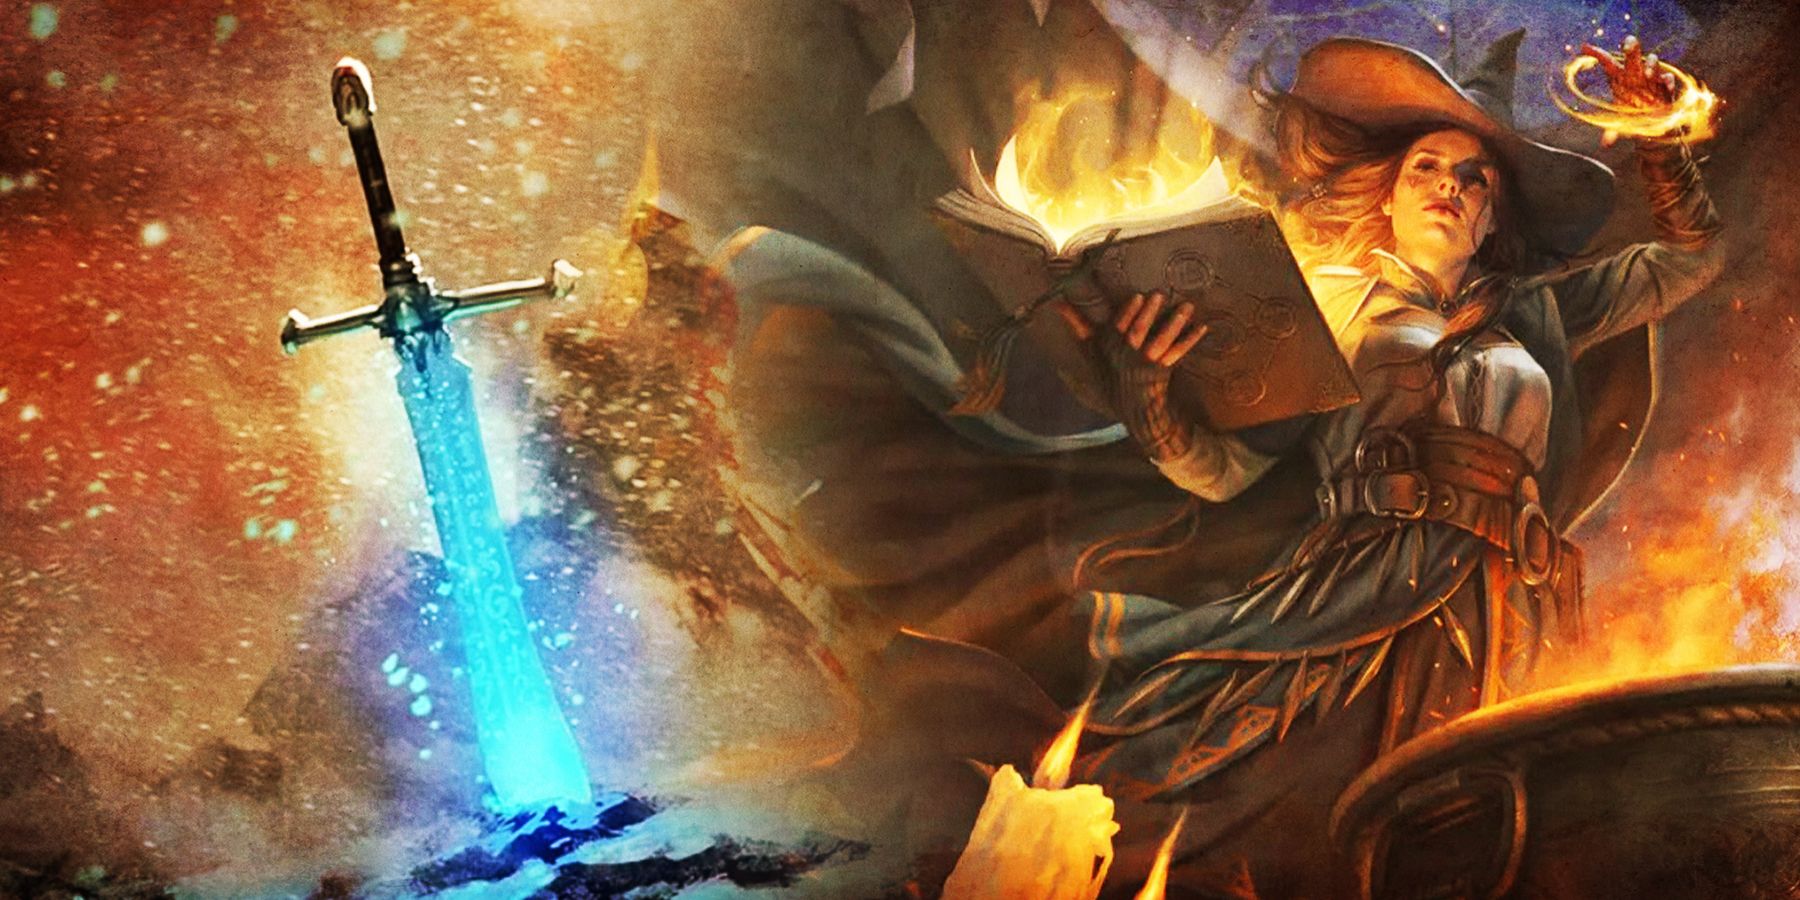 On the left, a moon-touched sword stuck in the mountainside glows blue in a snow storm. On the right, a warlock conjures a spell in front of burning candles and a steaming cauldron. 